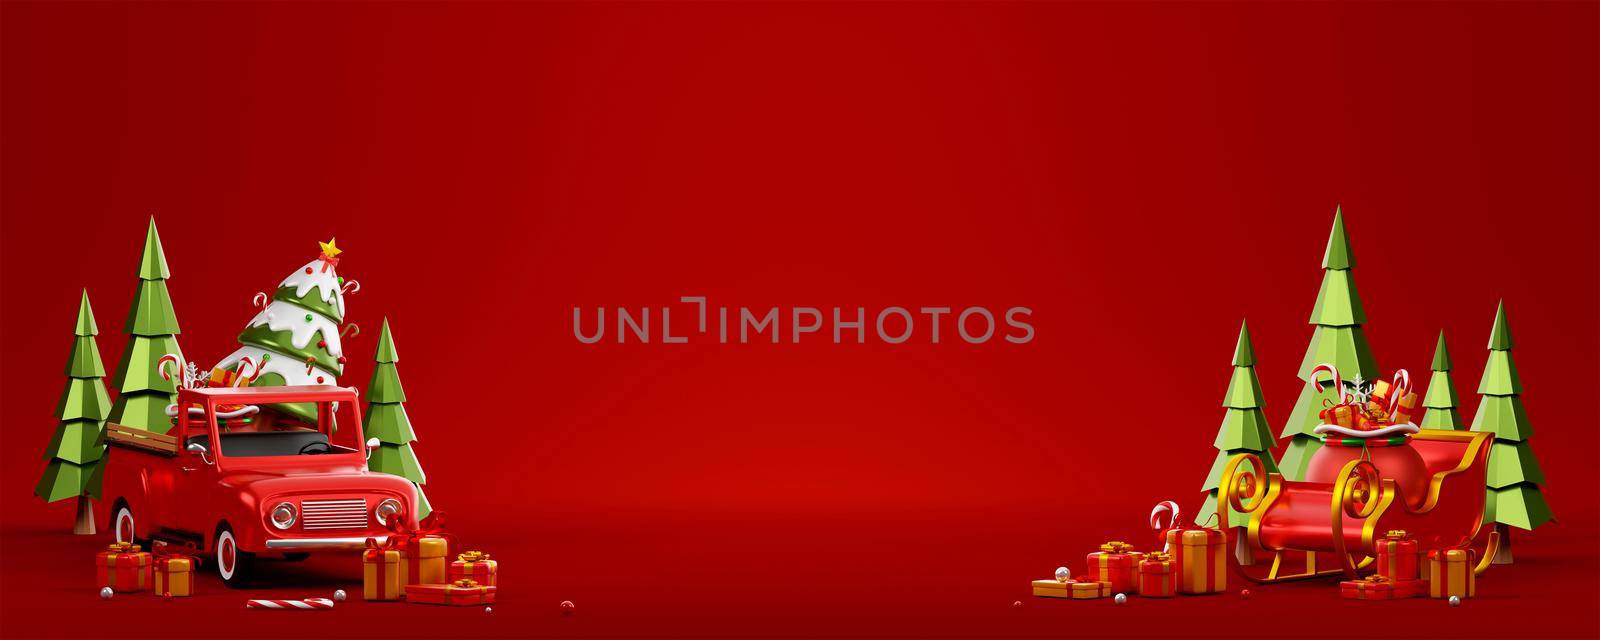 3d illustration Christmas banner of  Christmas truck and sleigh on red background